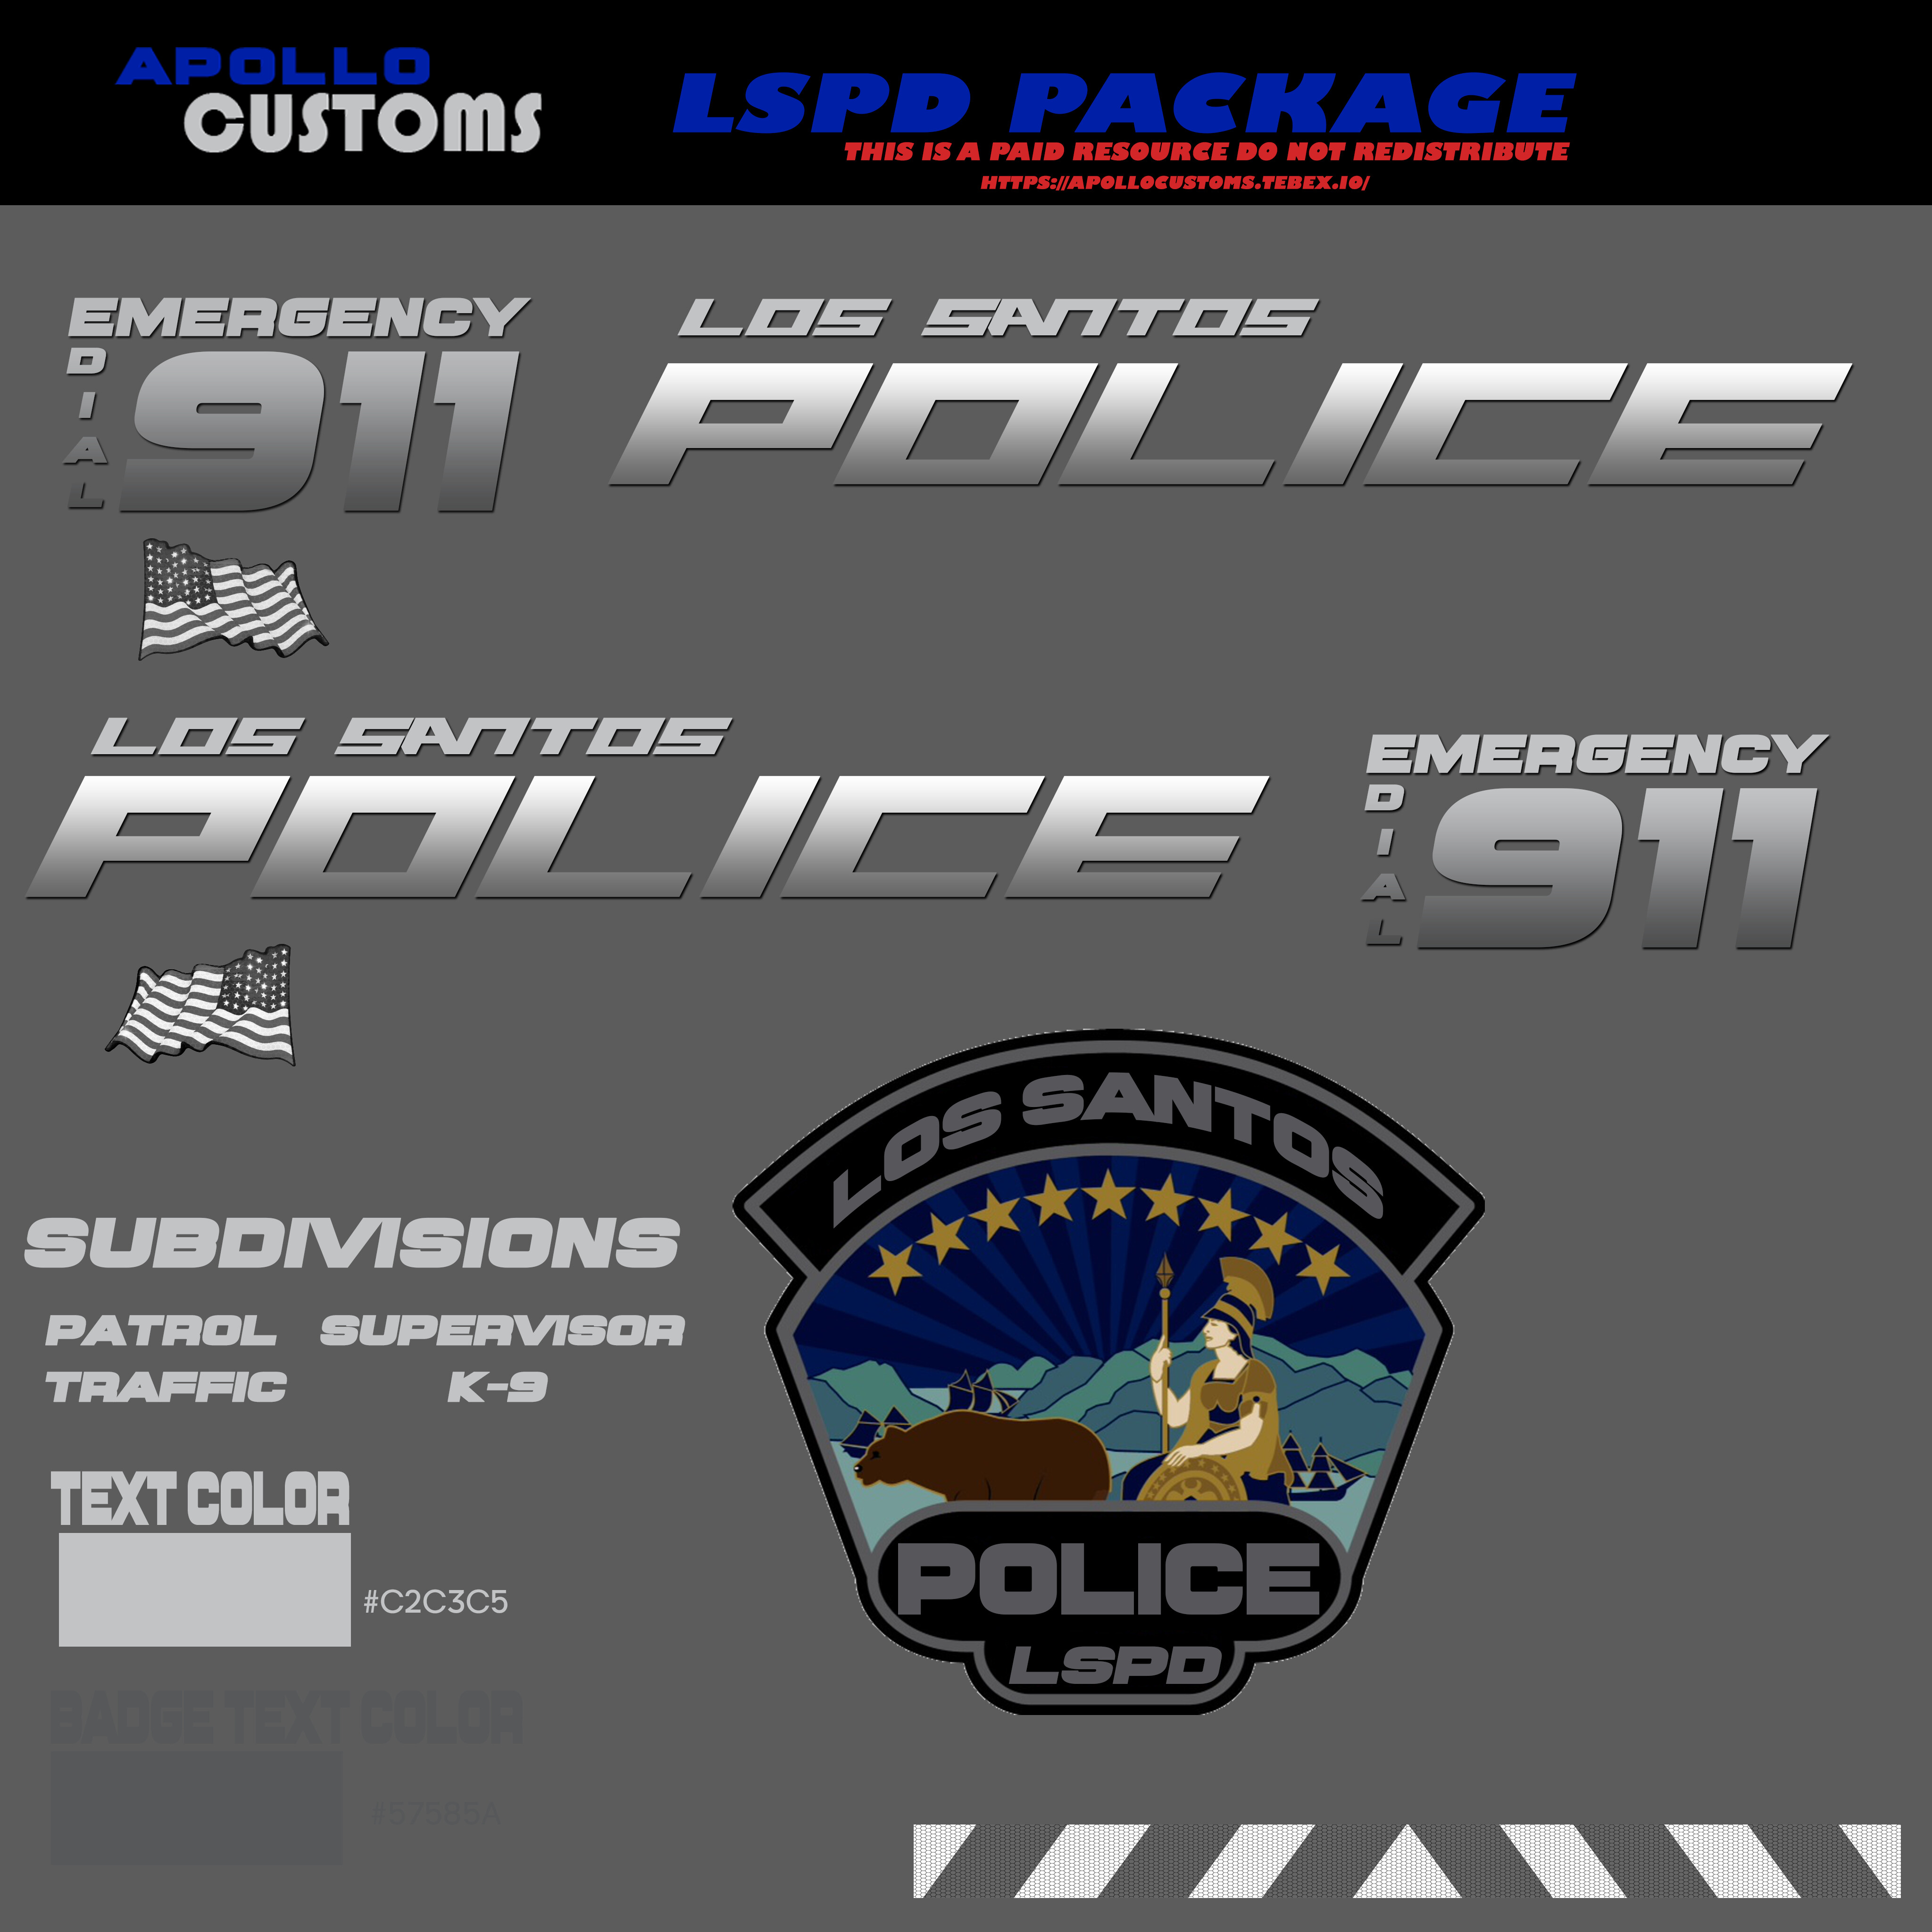 LSPDPACKAGE